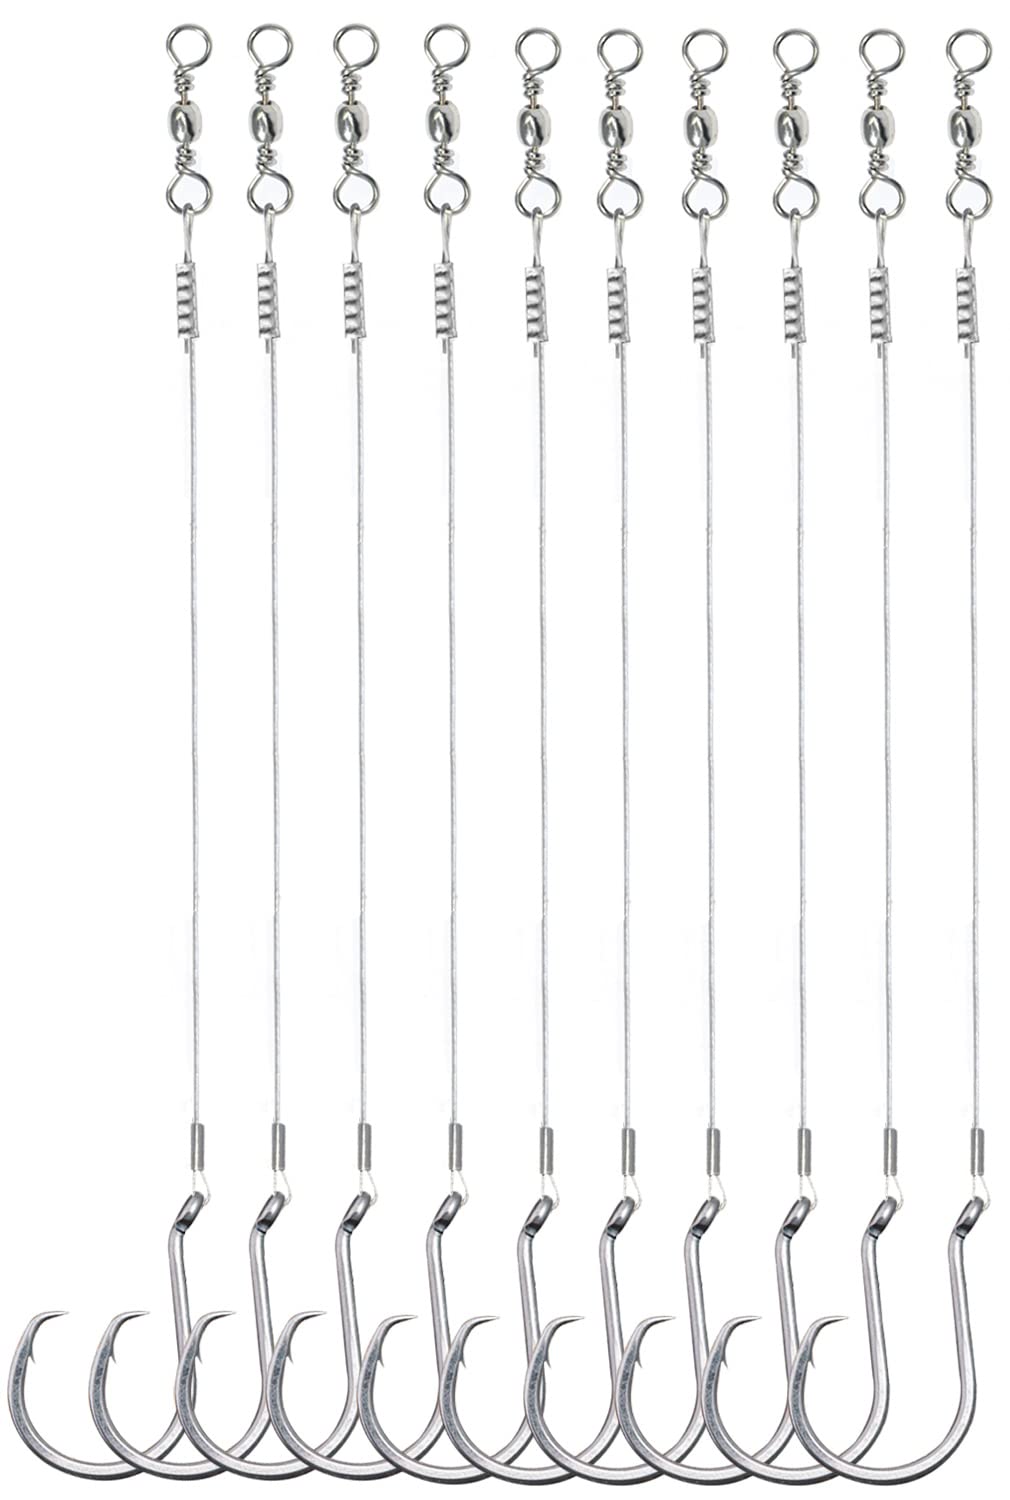 SEAOWL Saltwater Steel Circle Hook Rigs,Octopus Offset Fishing Hooks Leader  Wire for Catfish Bass 24pcs 5/0-12-45lb